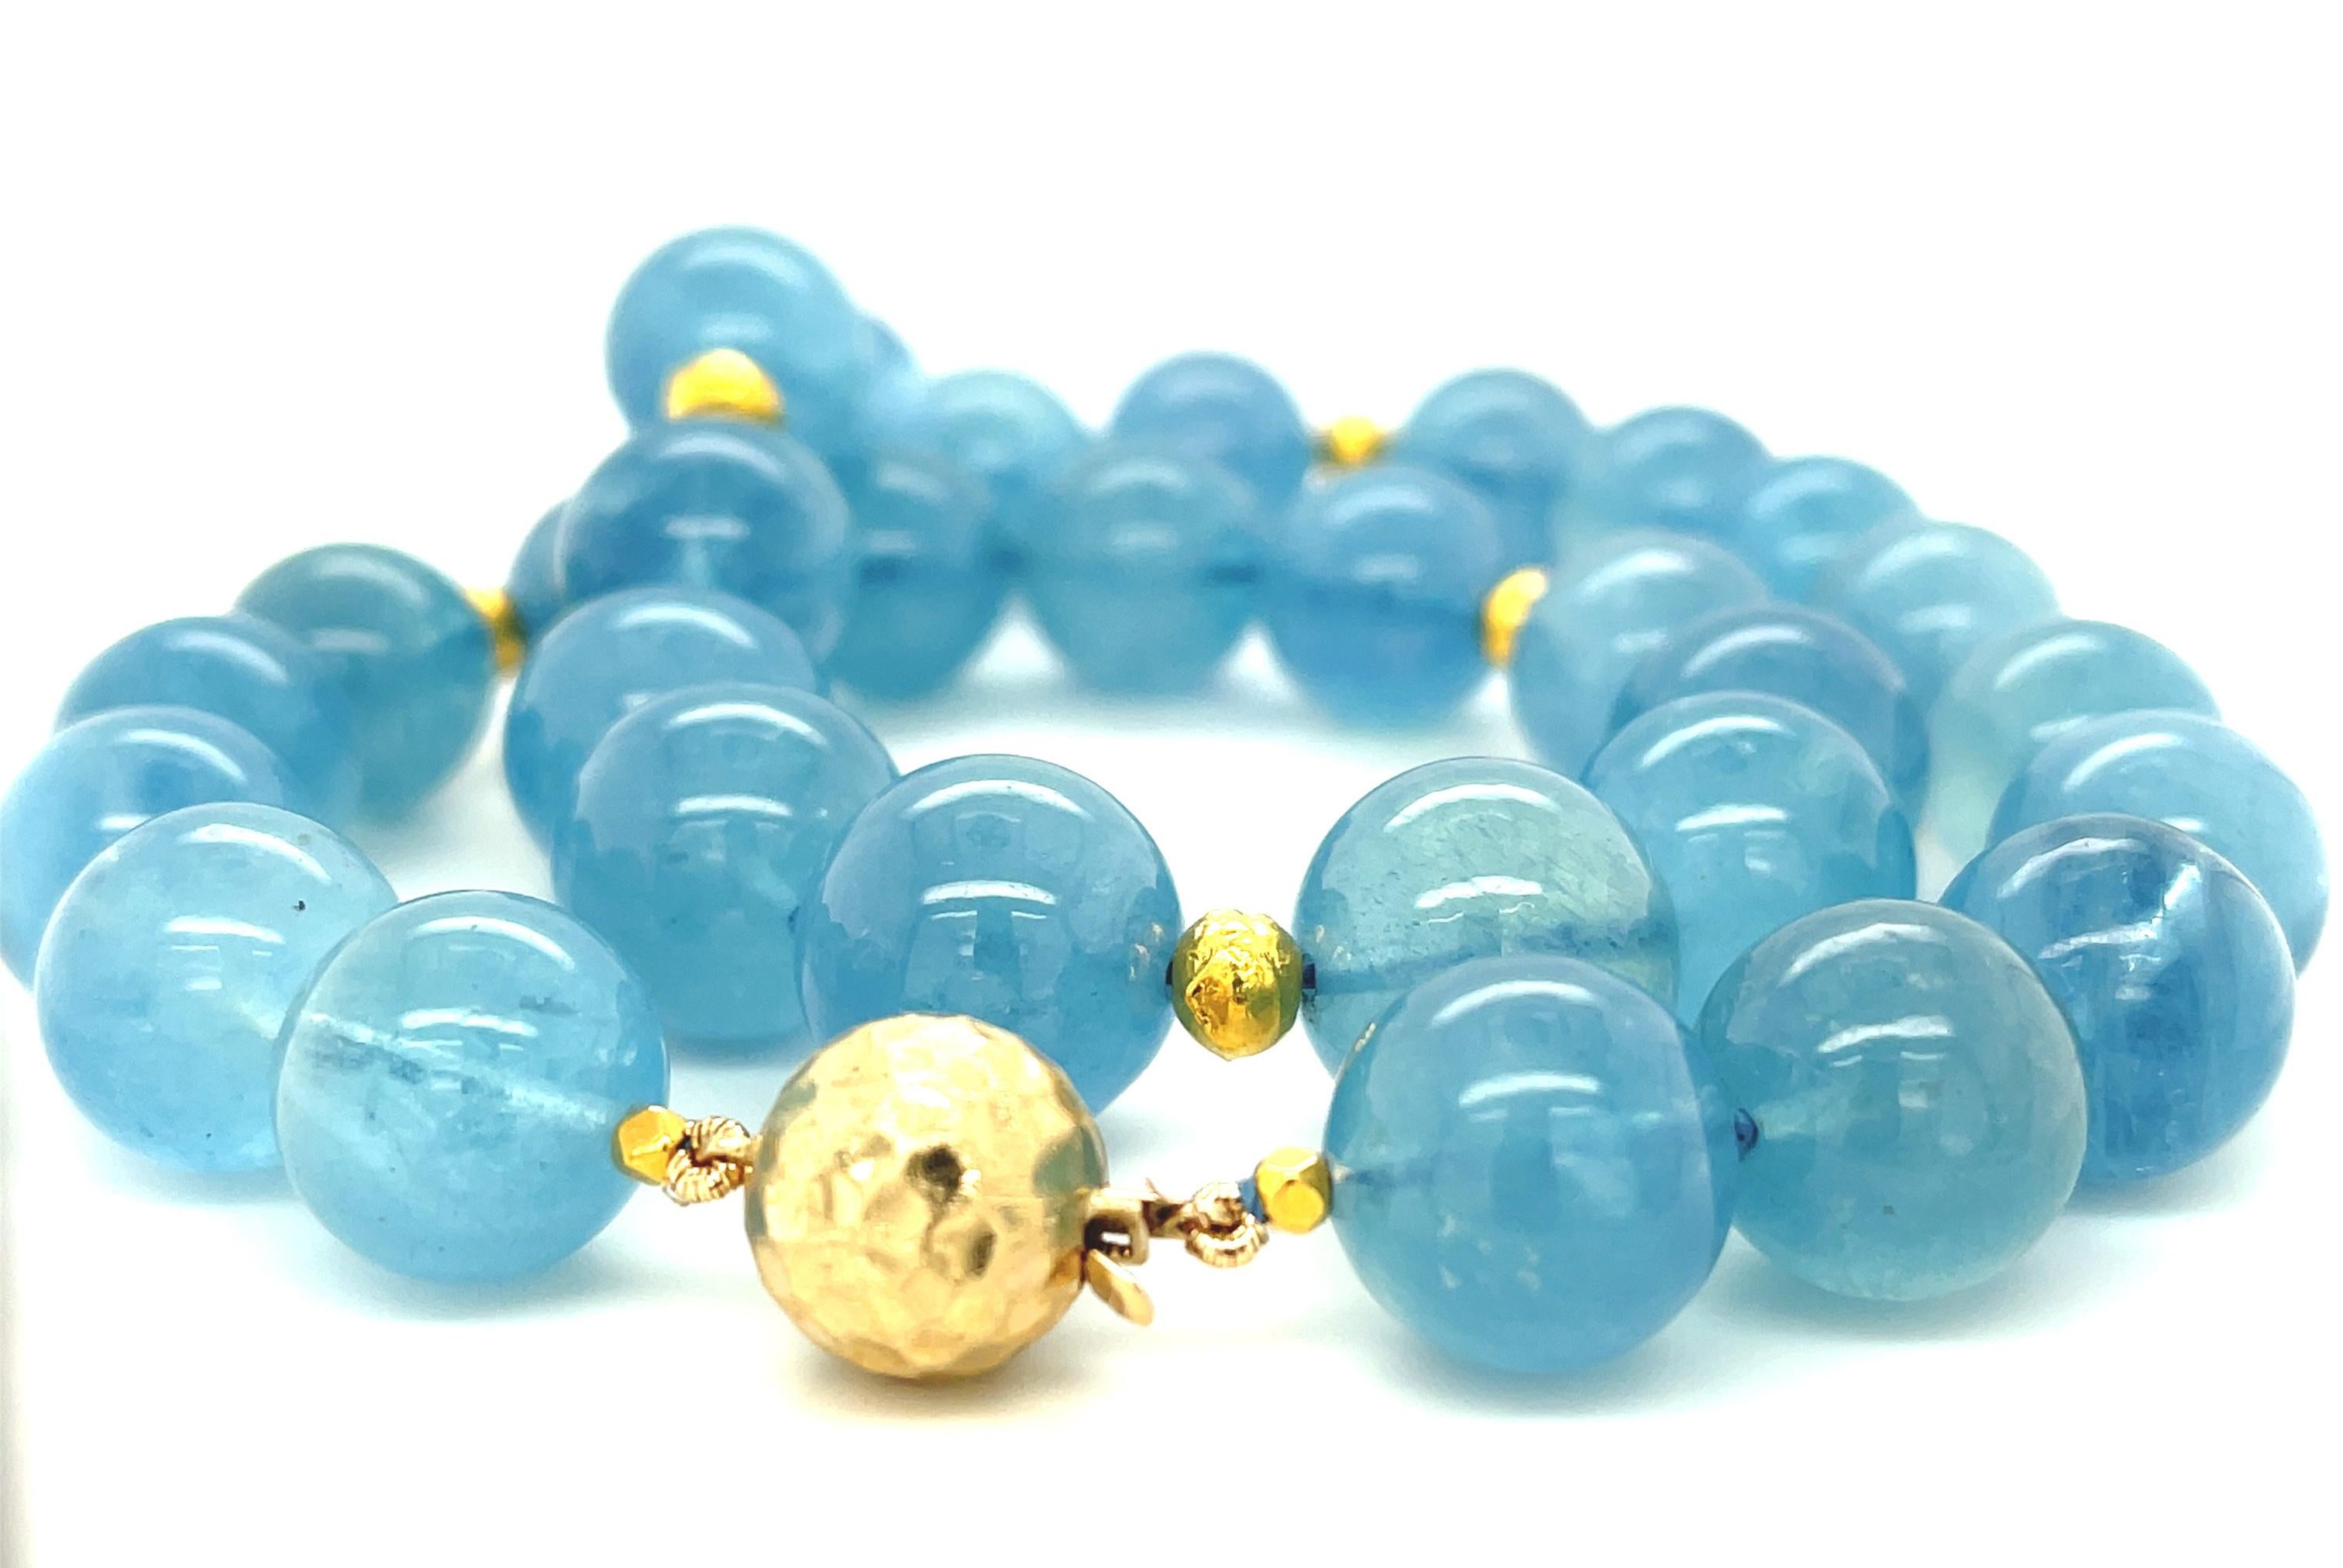 Artisan 14 to 15mm Round Aquamarine Bead Necklace with Yellow Gold Accents, 18.5 Inches For Sale